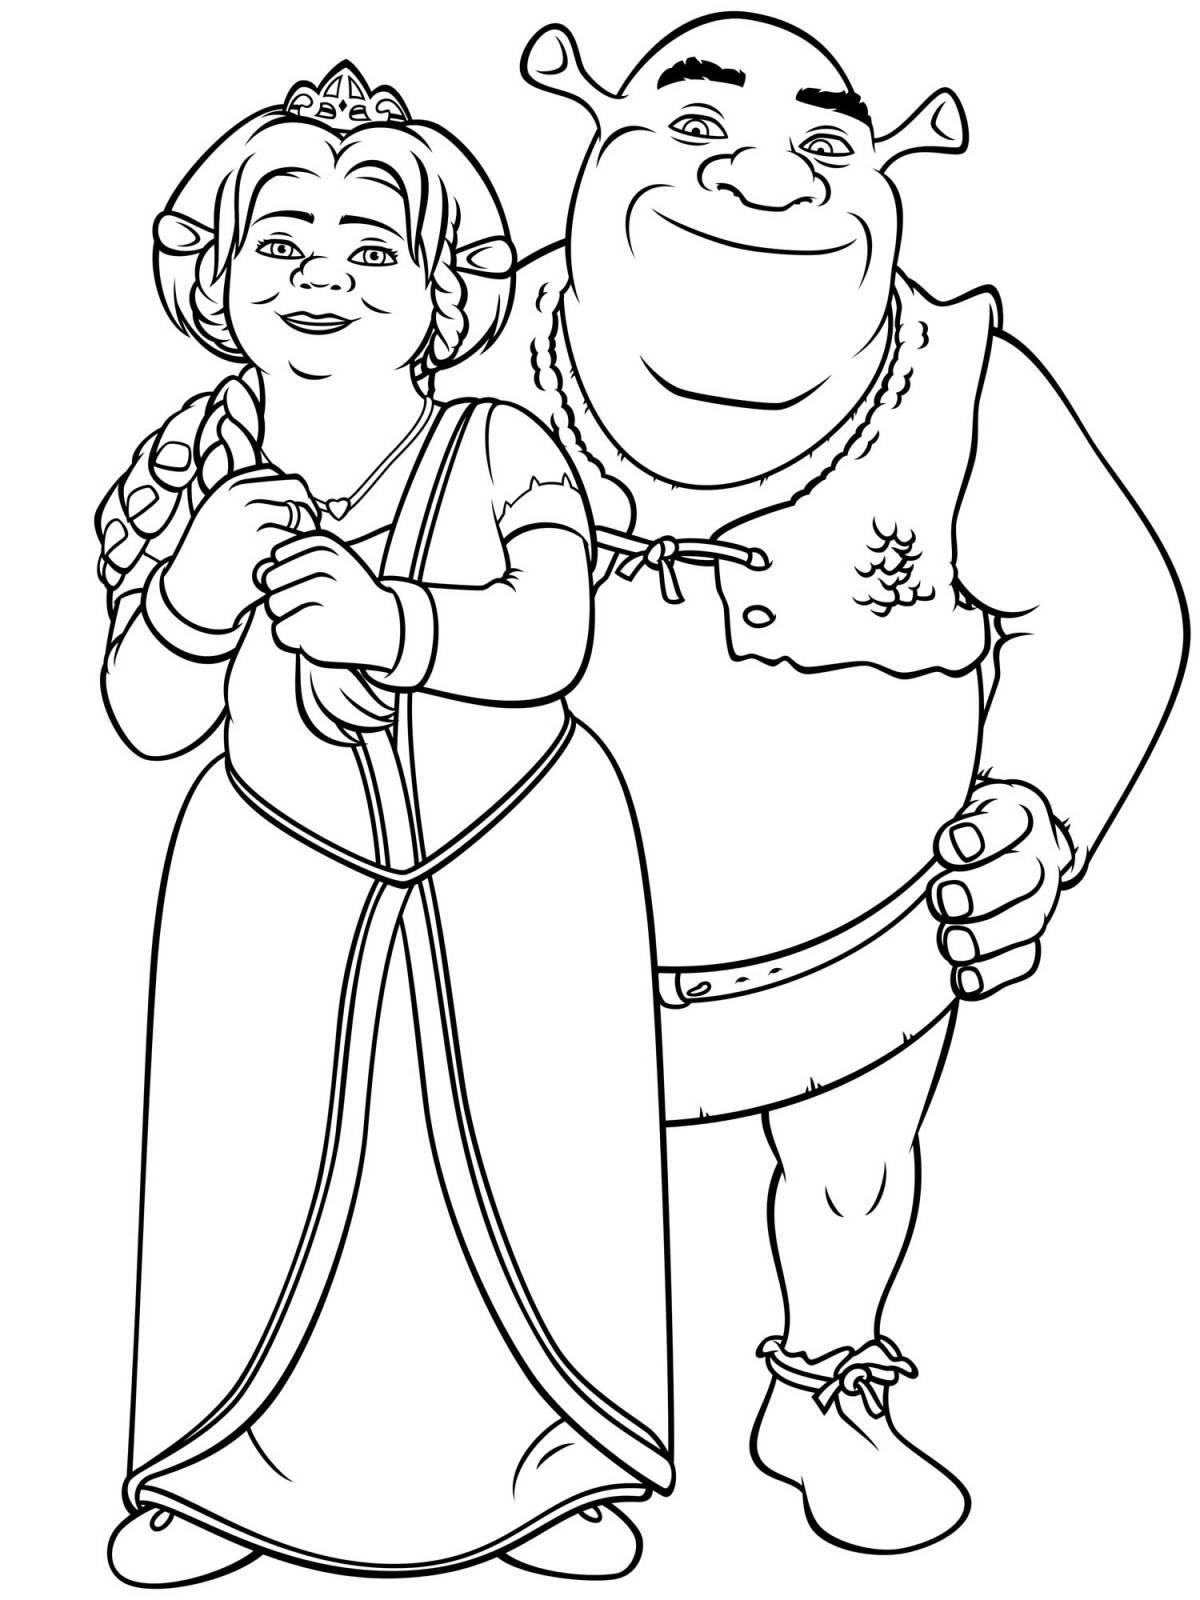 Fiona blooming coloring page